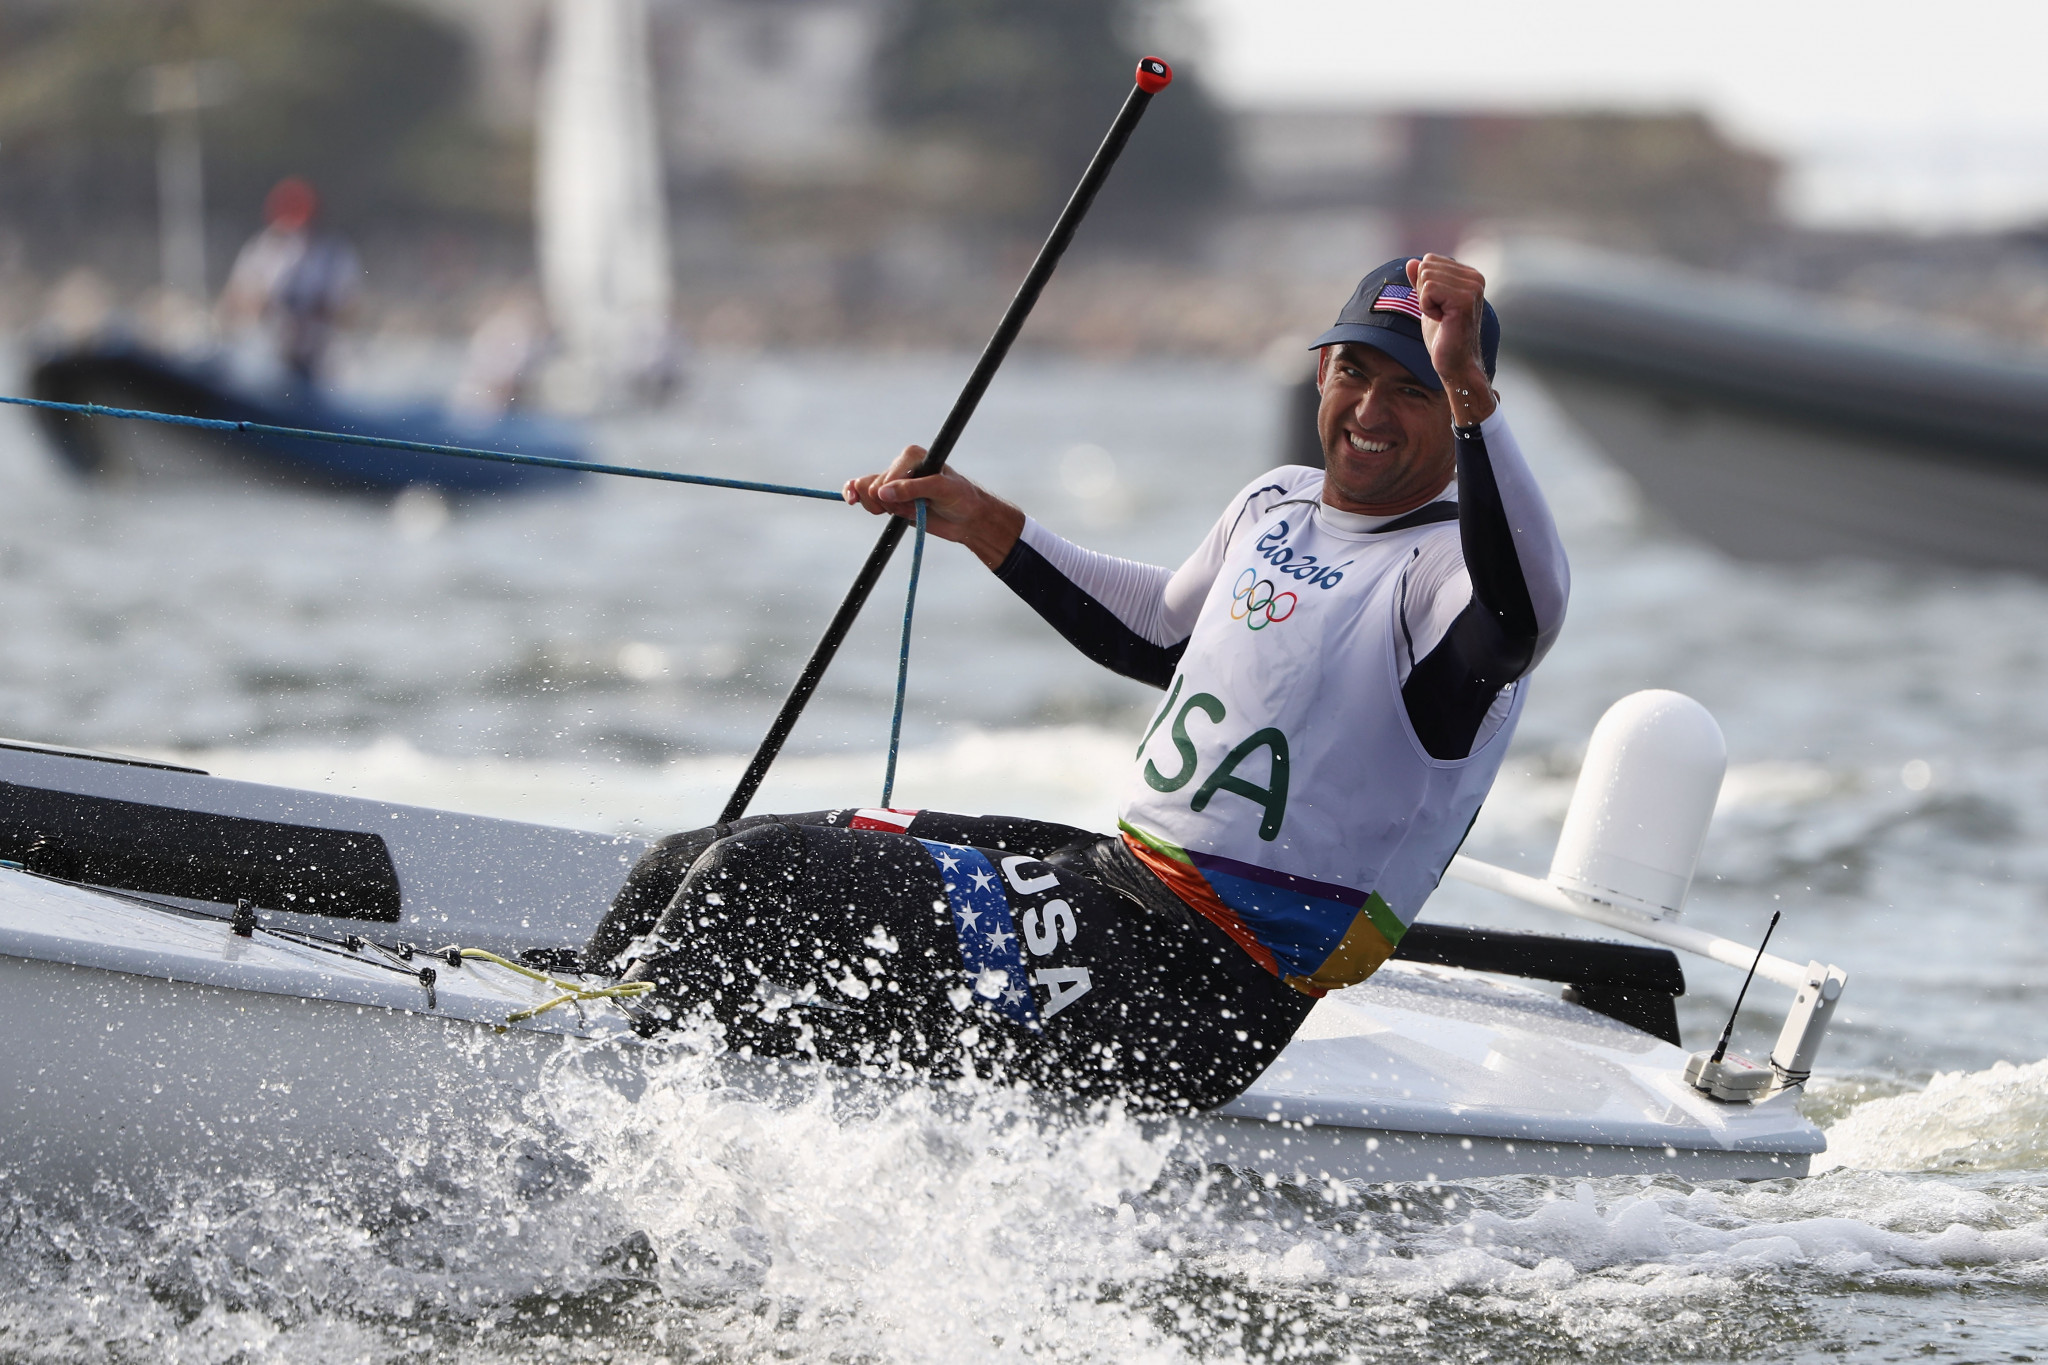 The only Olympic sailing medal won by a United States sailor in recent Games was a bronze for Caleb Paine in the Finn at Rio 2016 ©Getty Images